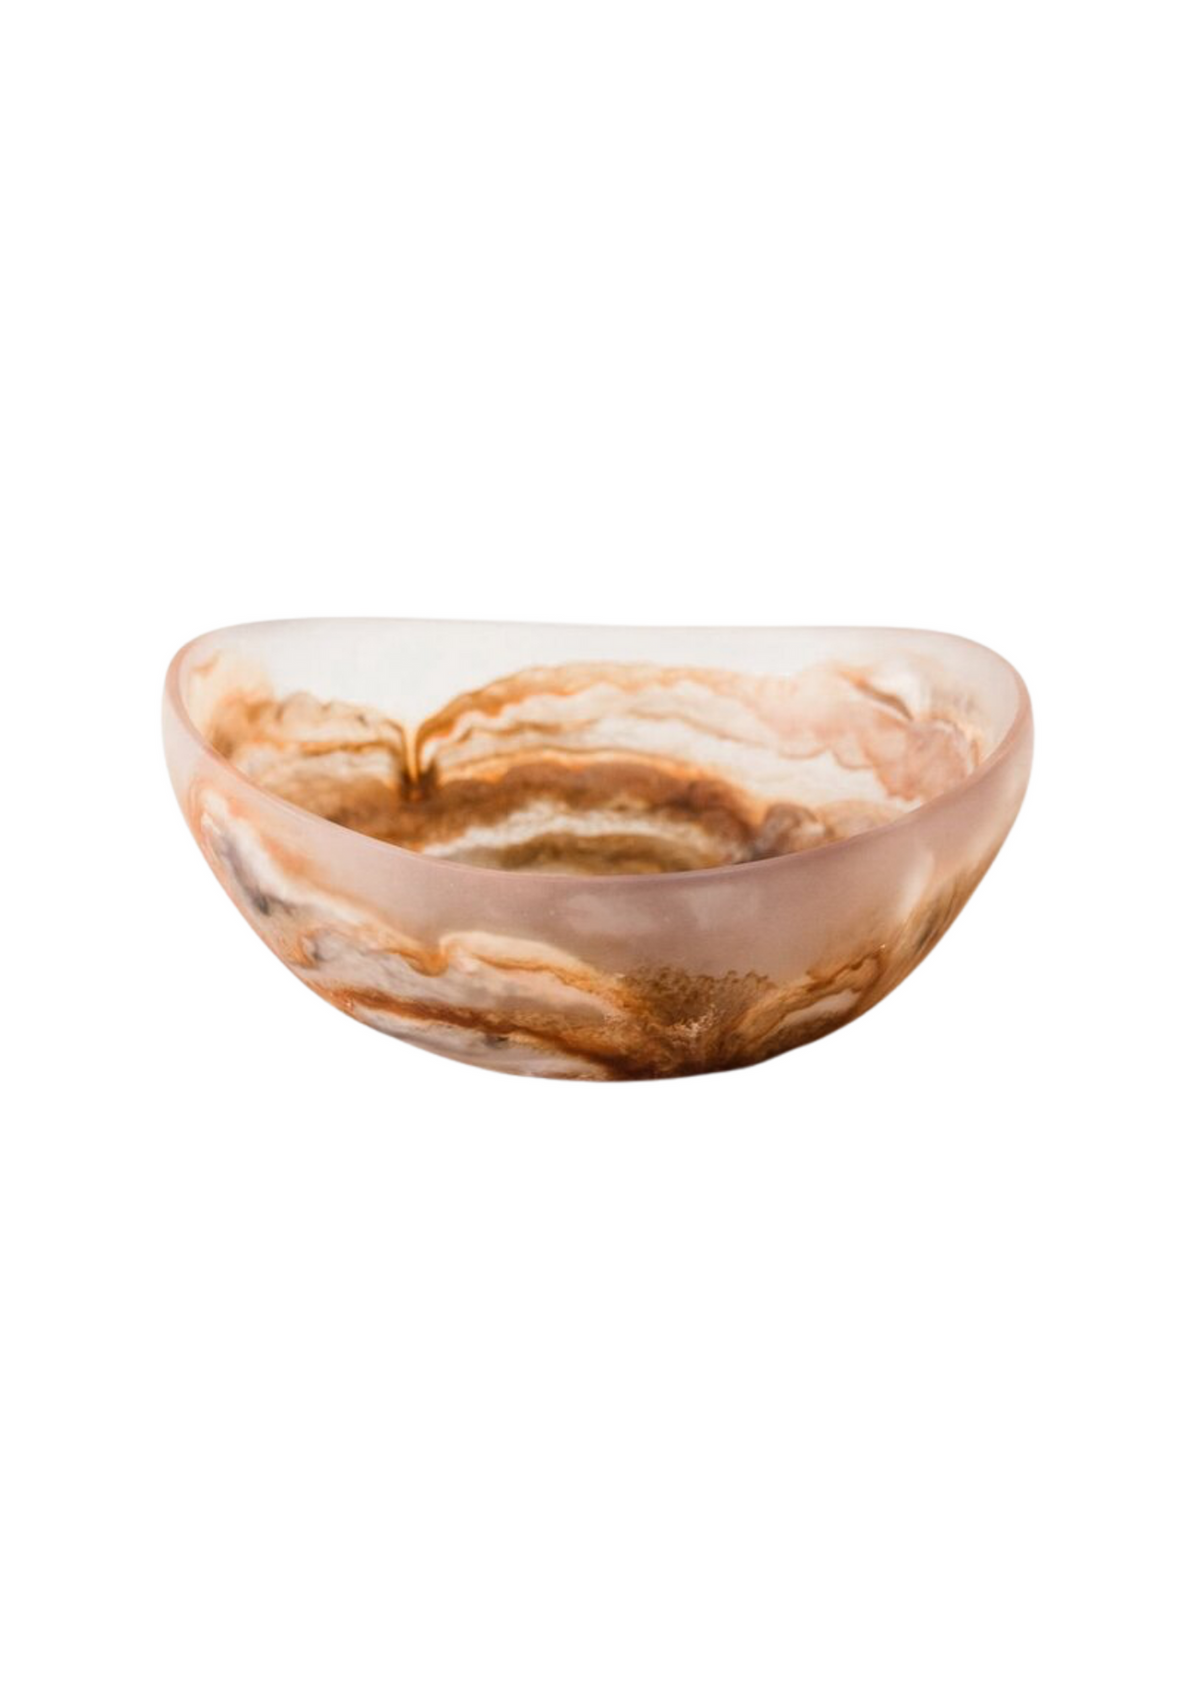 Almond Resin Bowl | Undisclosed